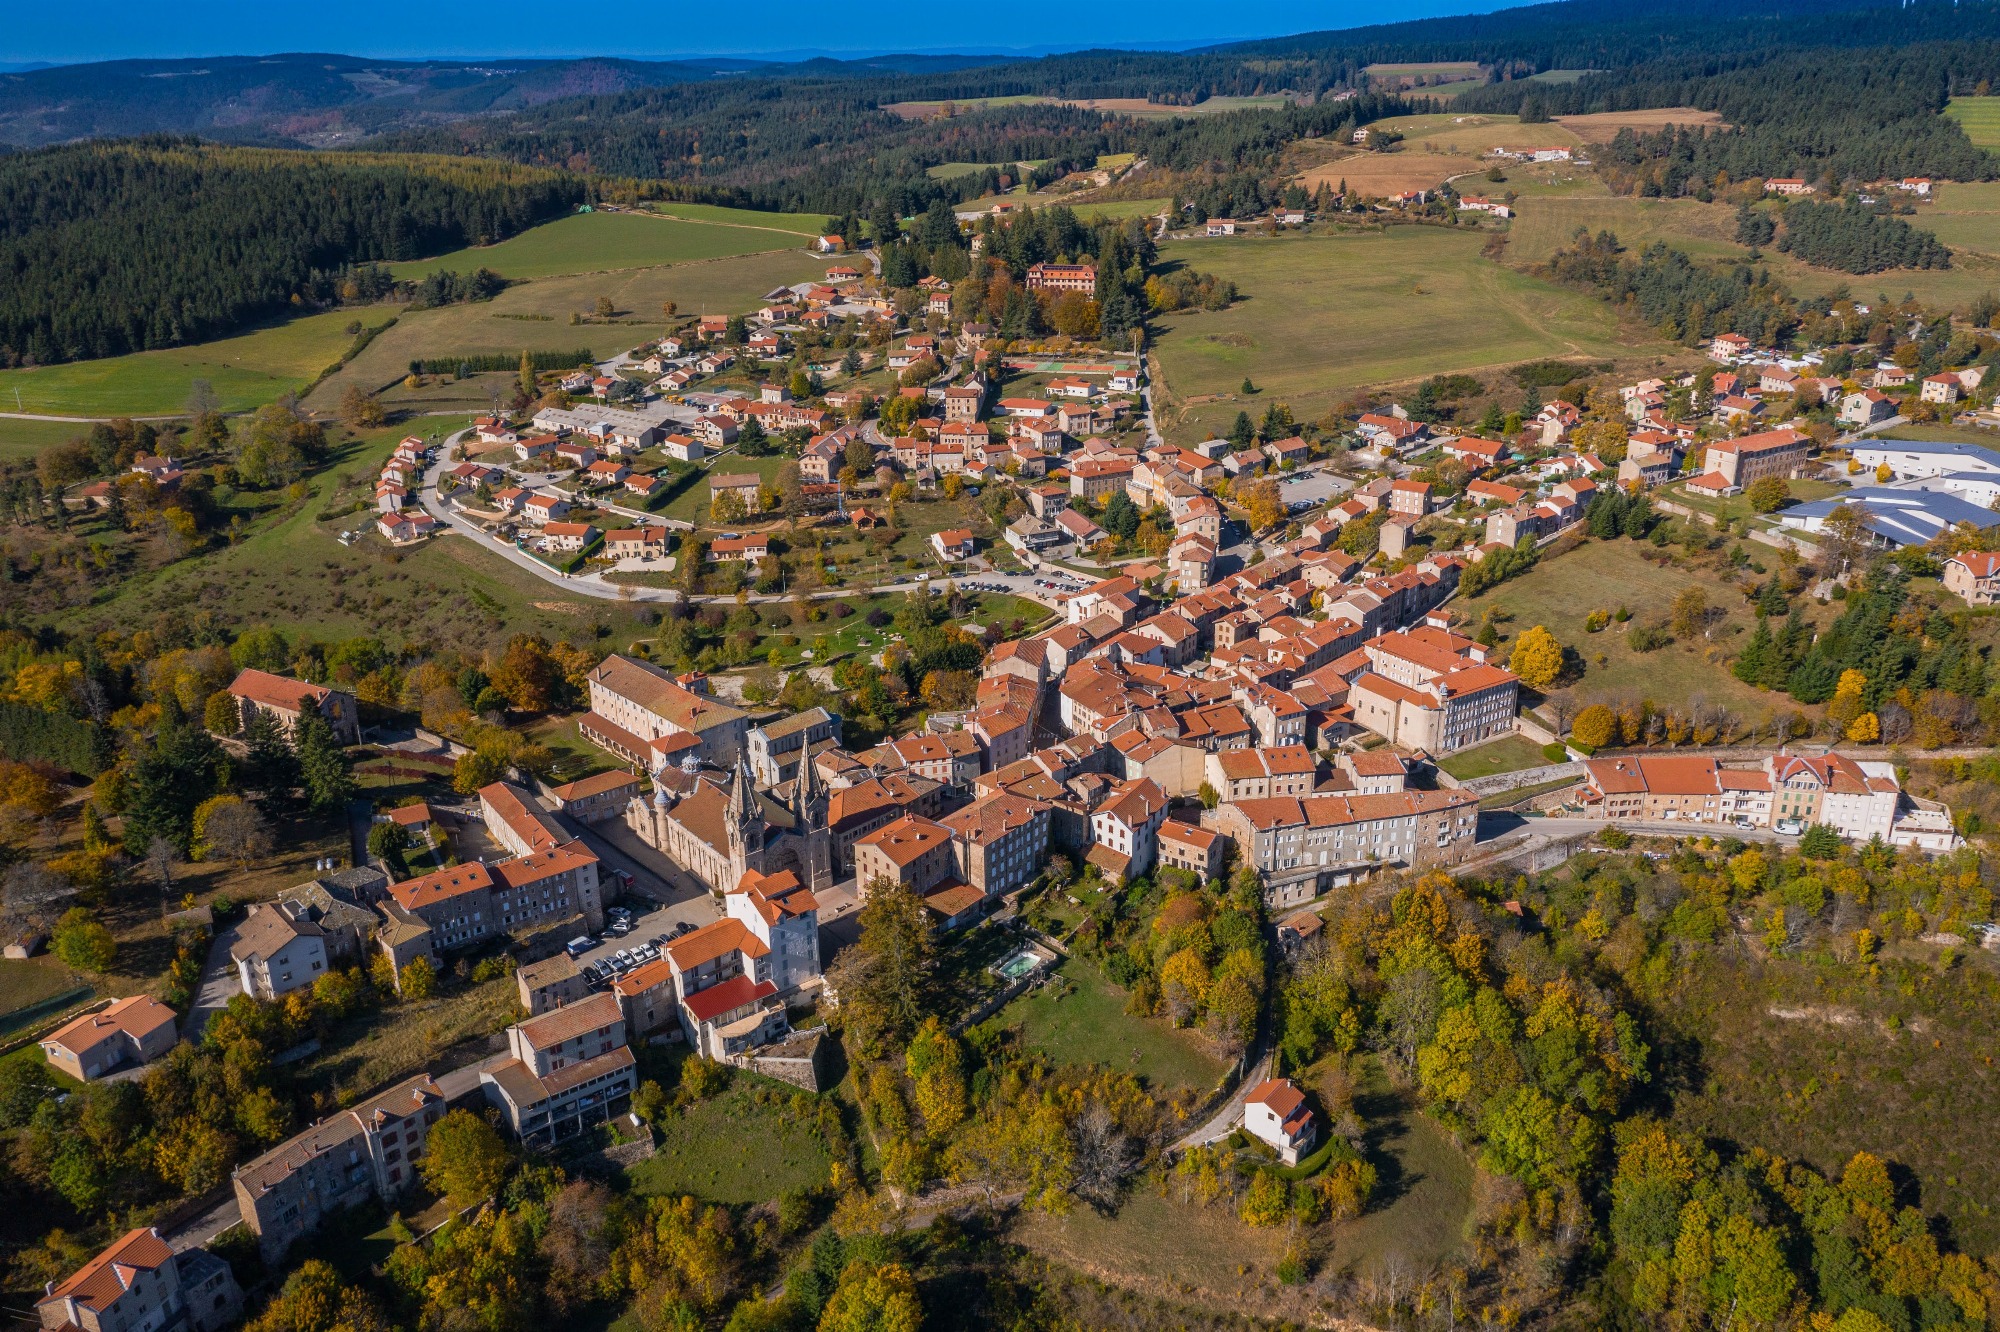 Lalouvesc seen from the sky